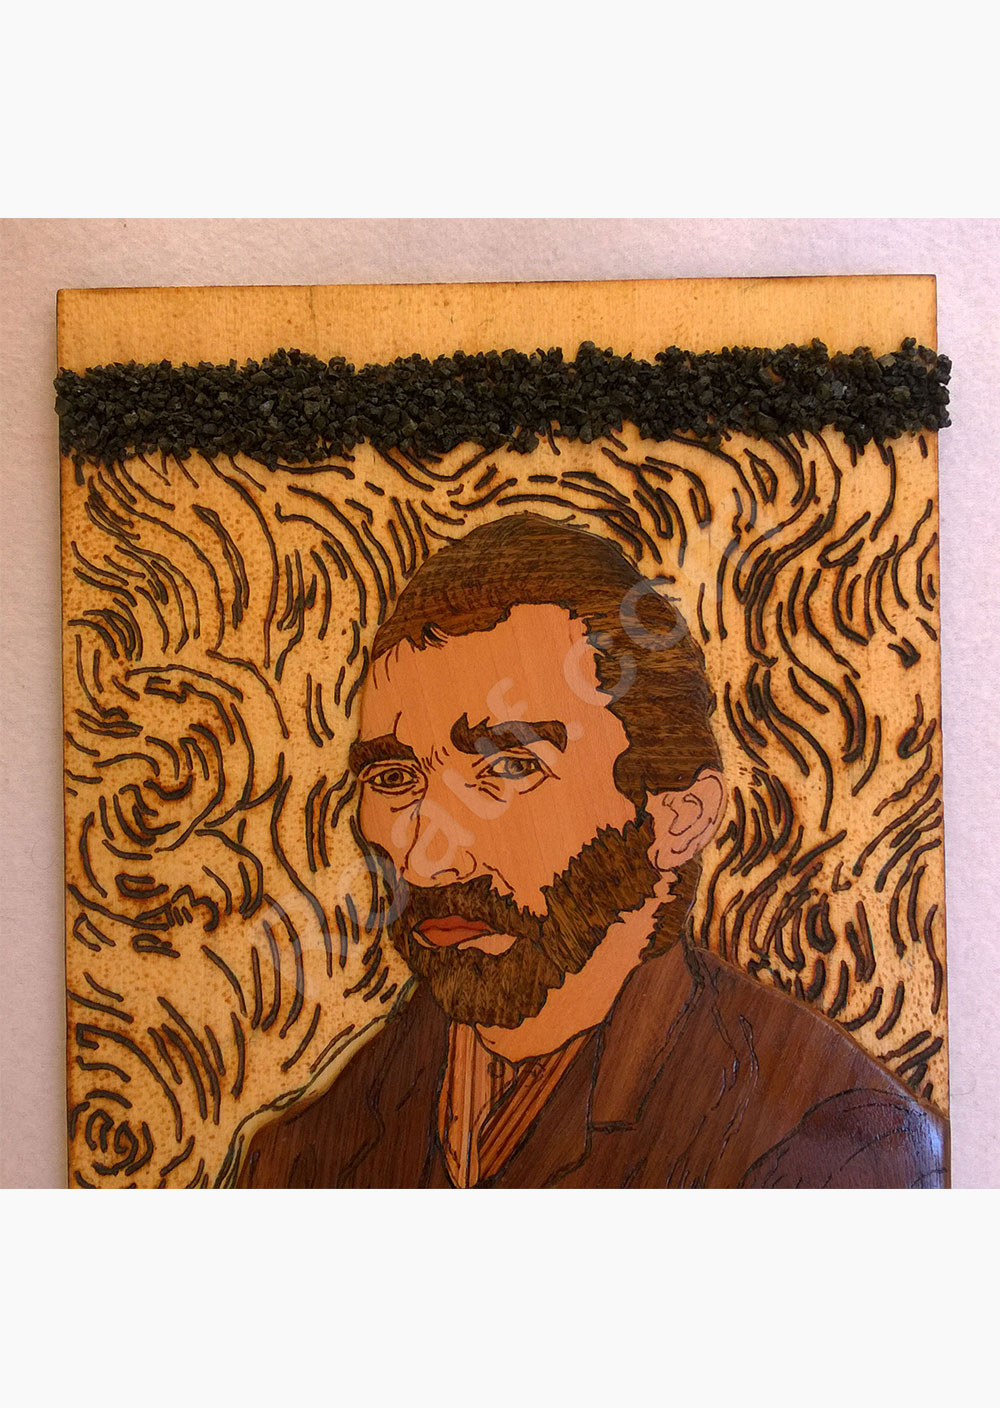 Wood Inlay / Wood Marquetry and Pyrography Panel of Van Gogh